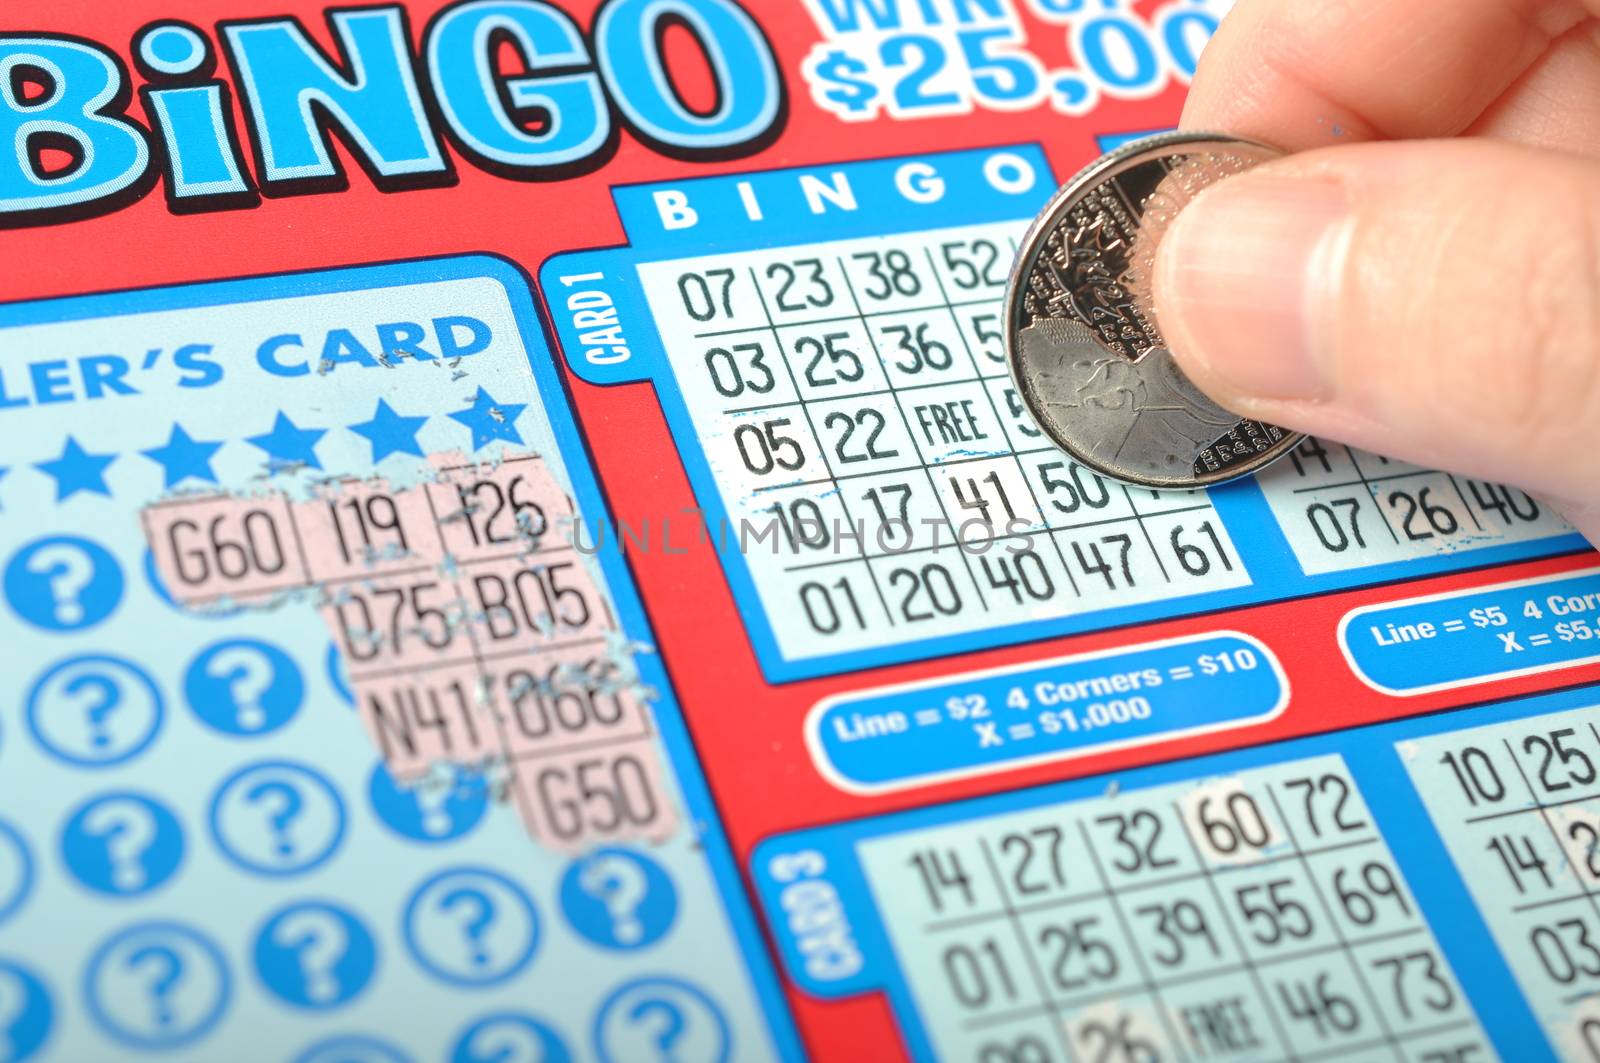 Scratching a lottery ticket. The British Columbia Lottery Corporation has provided government sanctioned lottery games in British Columbia since 1985. 